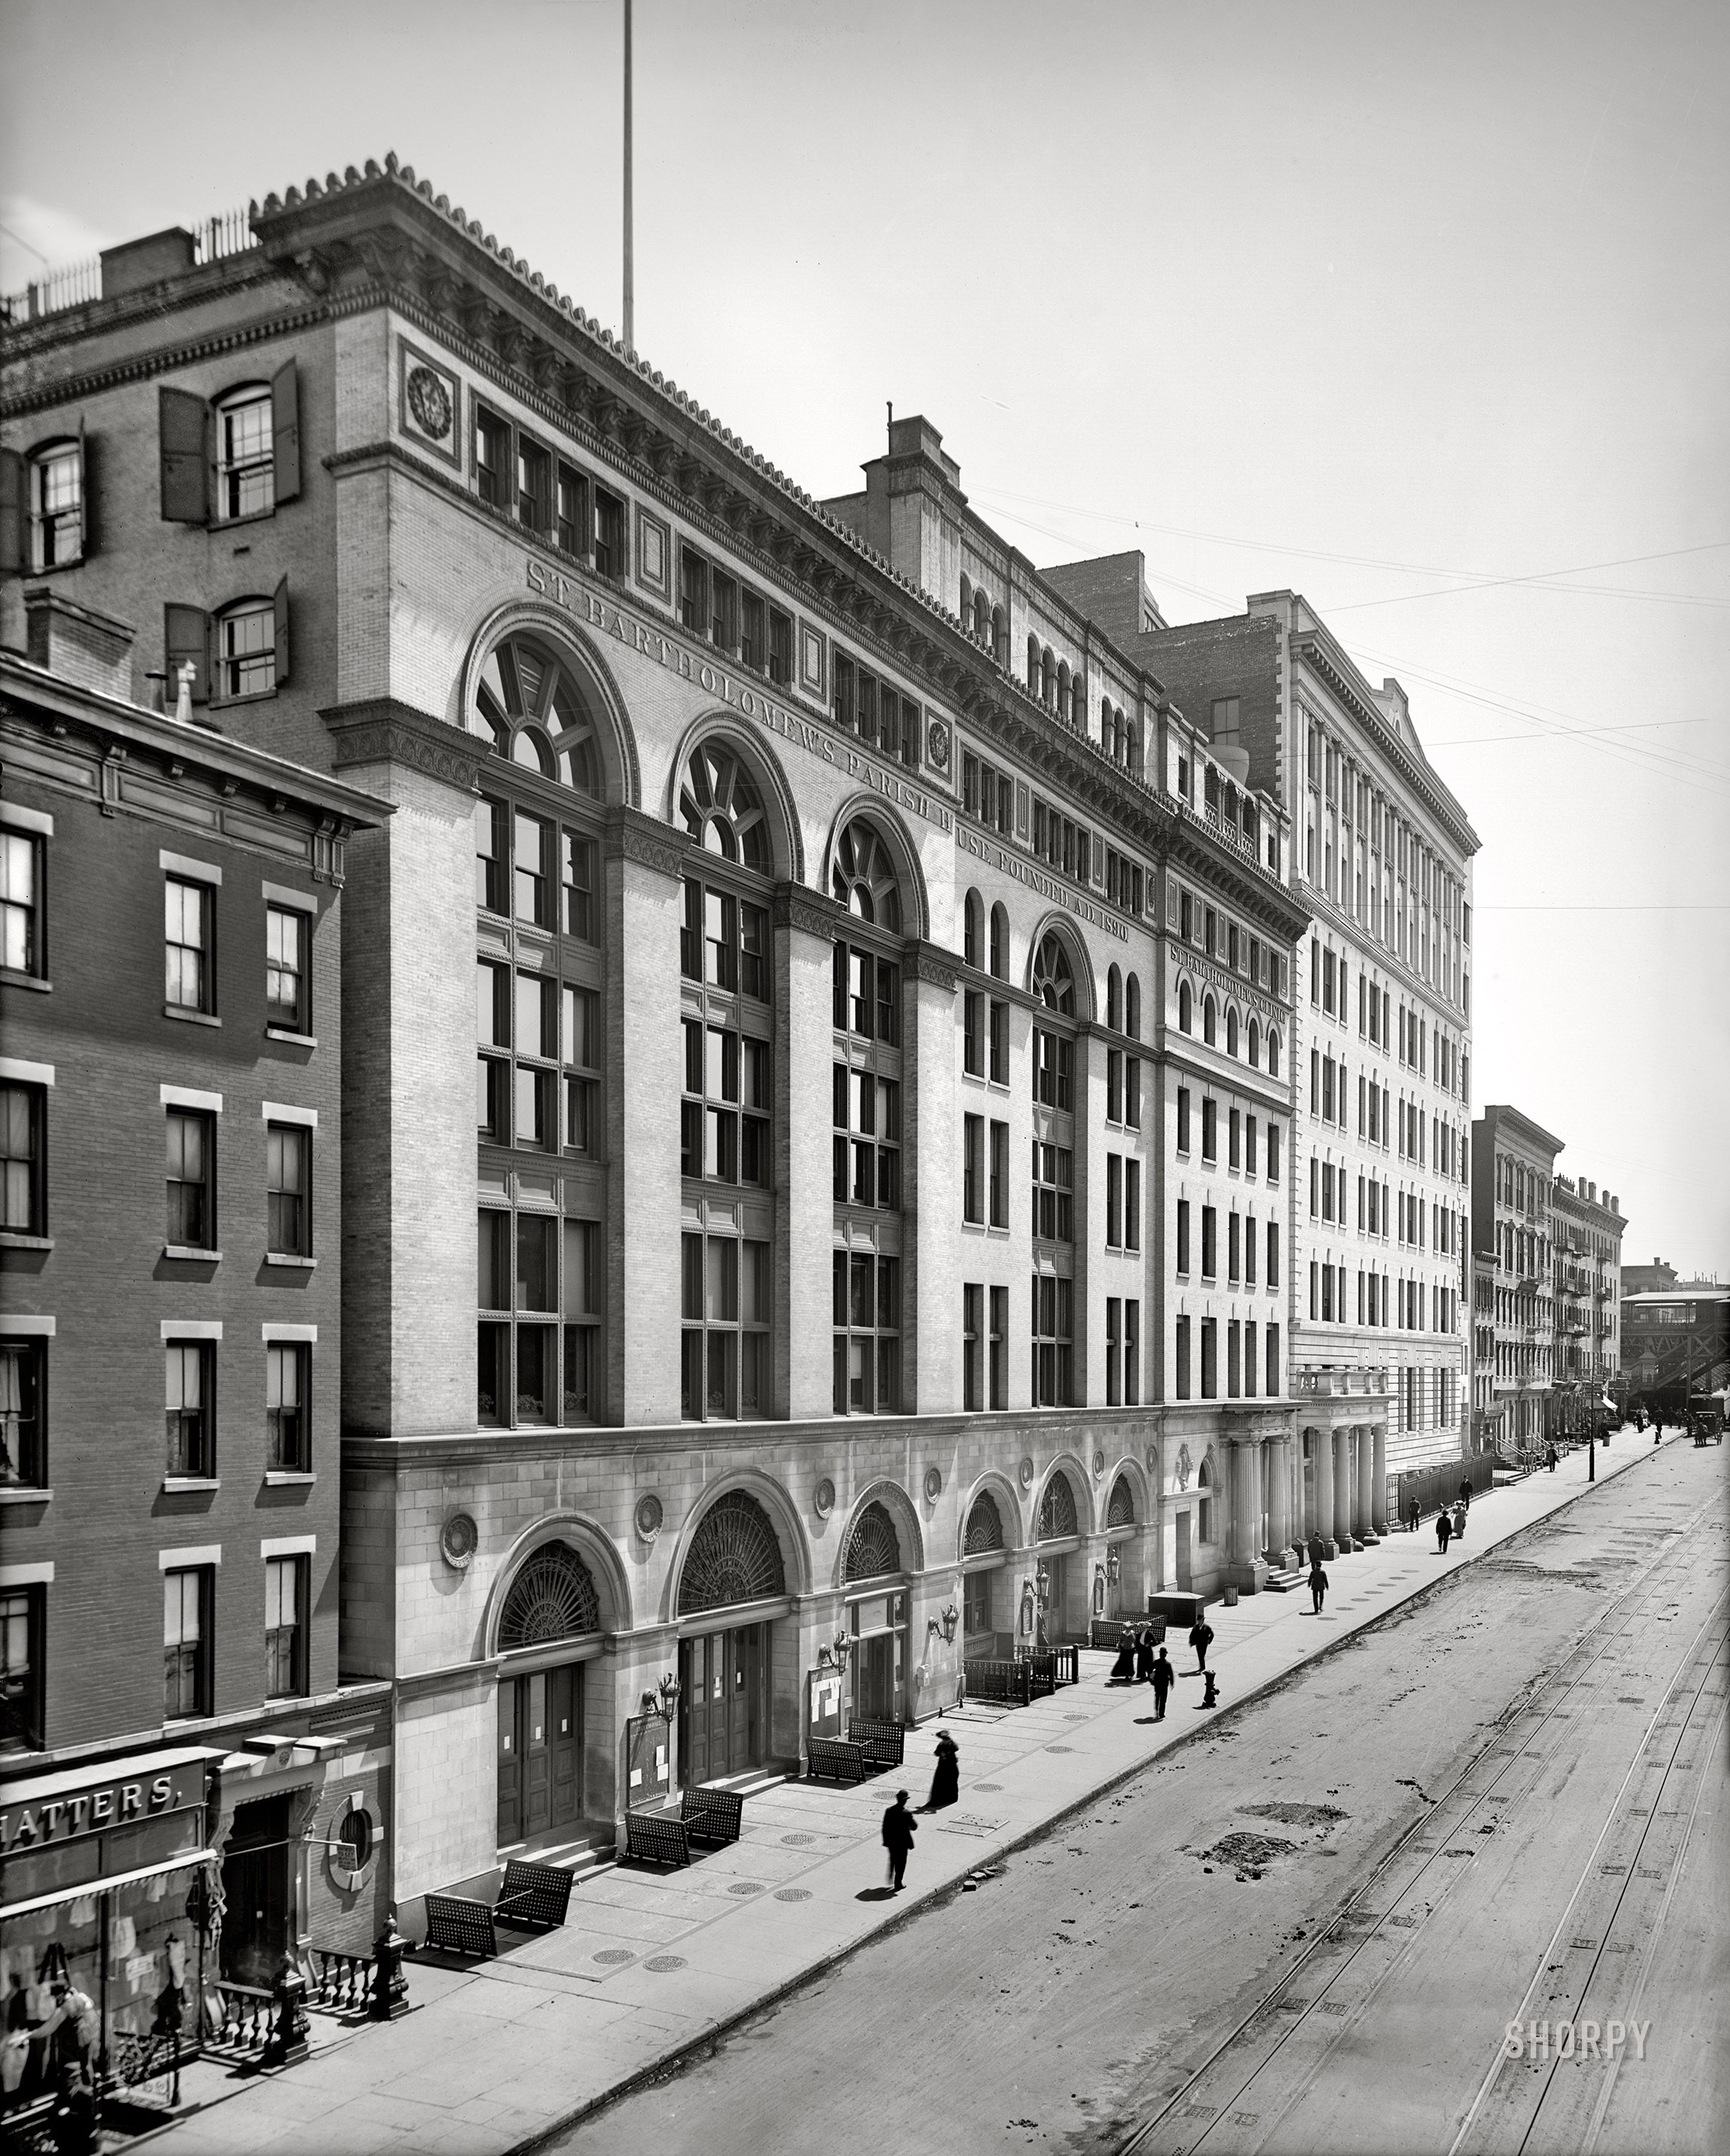 New York circa 1905. "St. Bartholomew's Church parish house and clinic, East 42nd Street." 8x10 inch dry plate glass negative, Detroit Publishing Company. View full size.